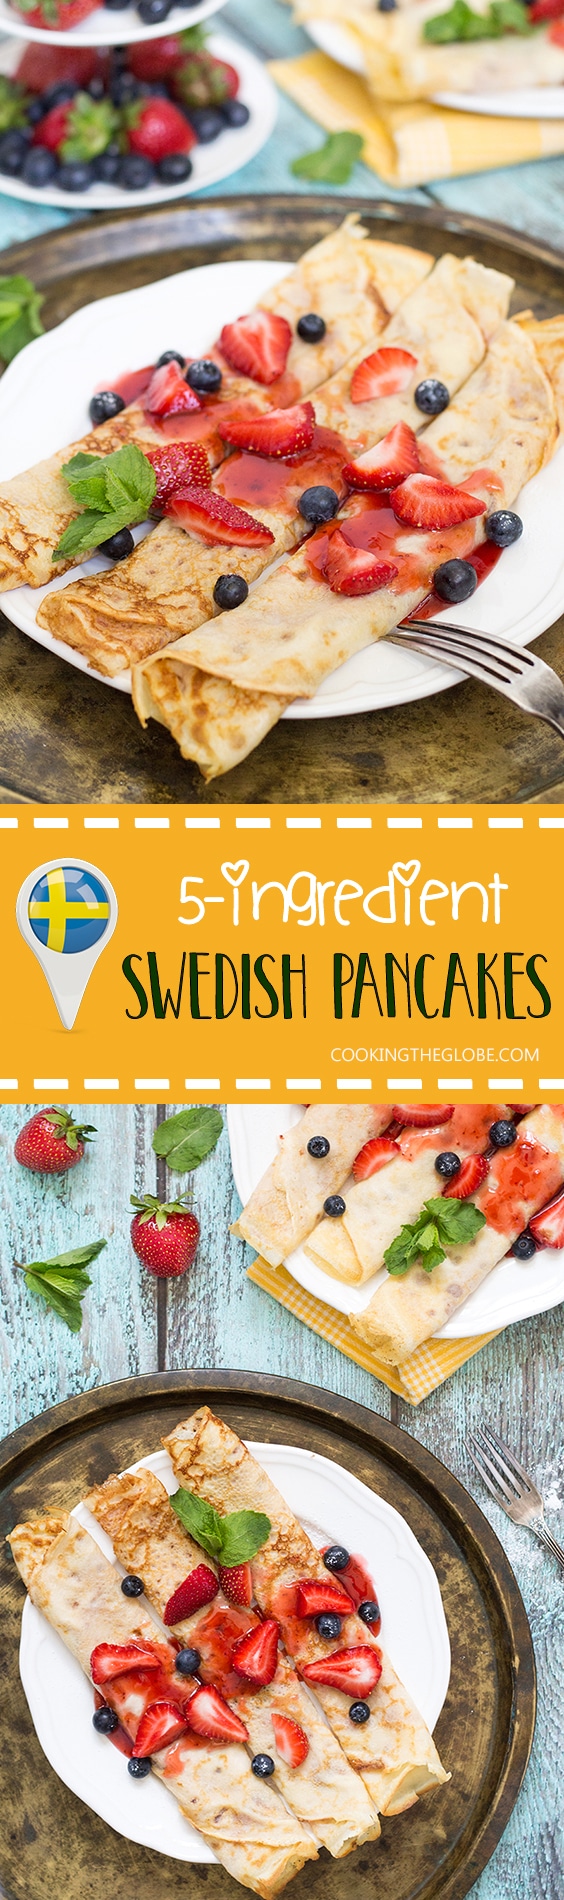 Swedish Pancakes can be stuffed or topped with any sweet ingredients you like. This recipe requires only 5 ingredients and is super simple!